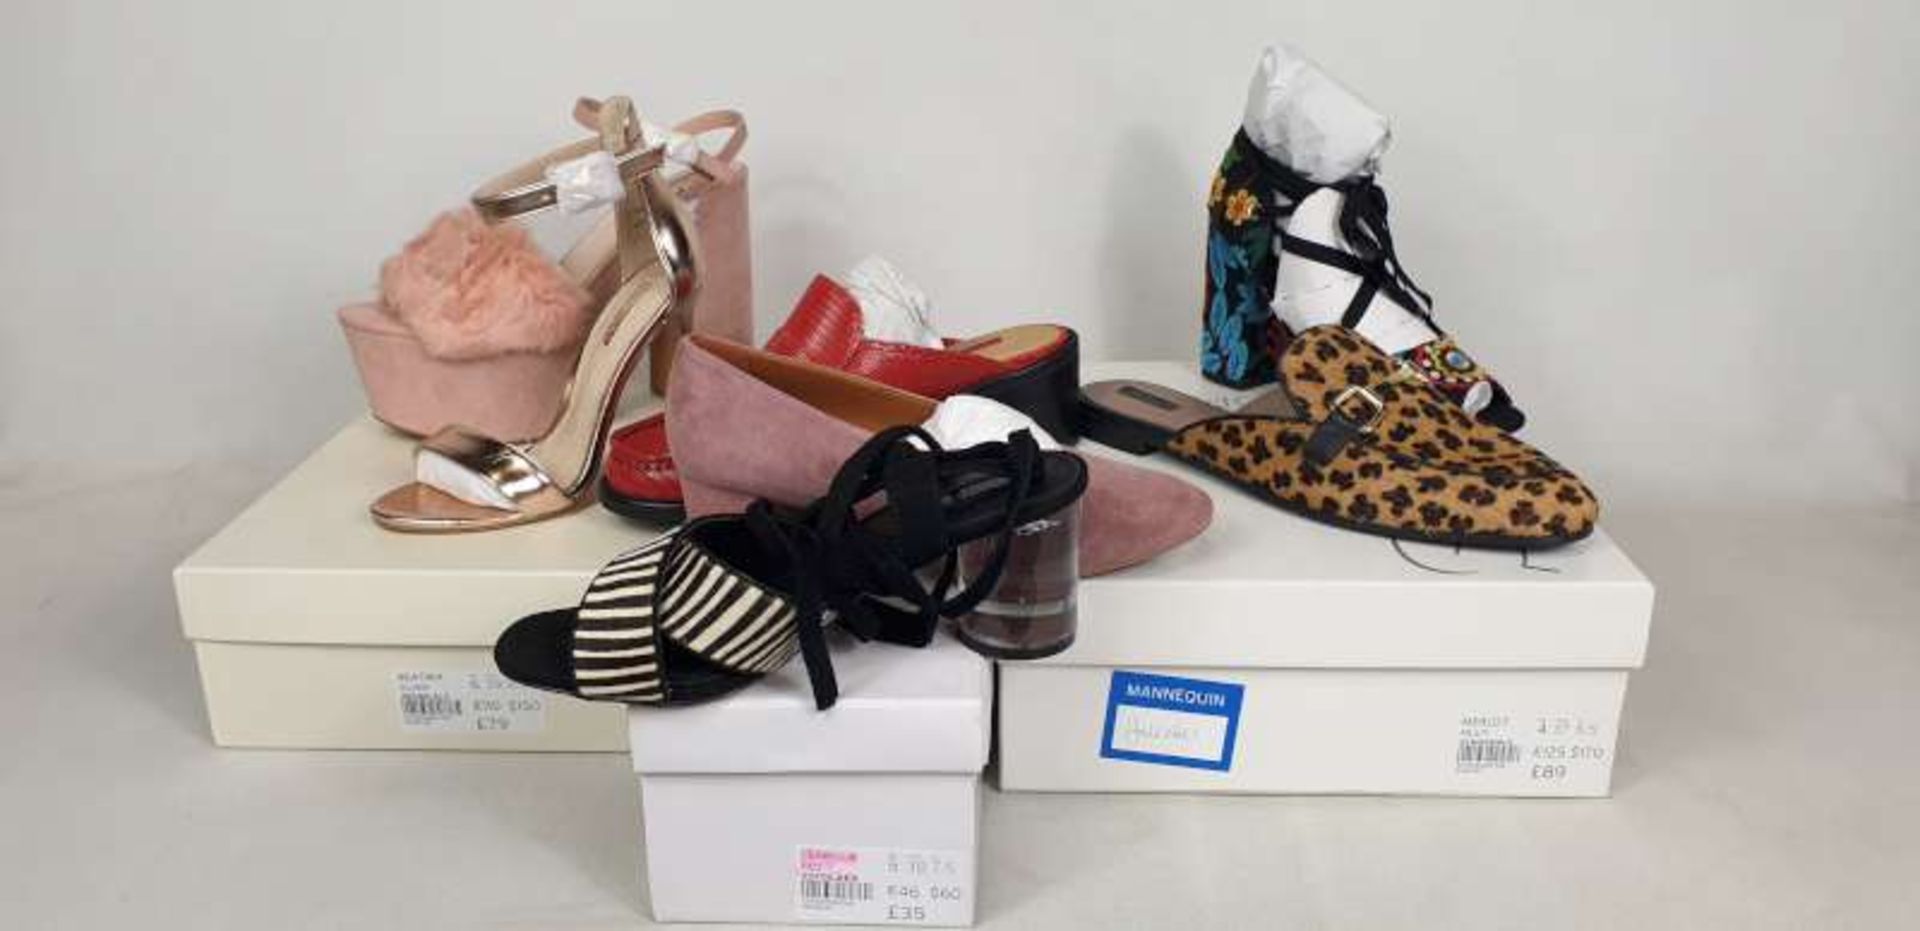 10 X BOXED TOP SHOP SHOES IN VARIOUS STYLES AND SIZES